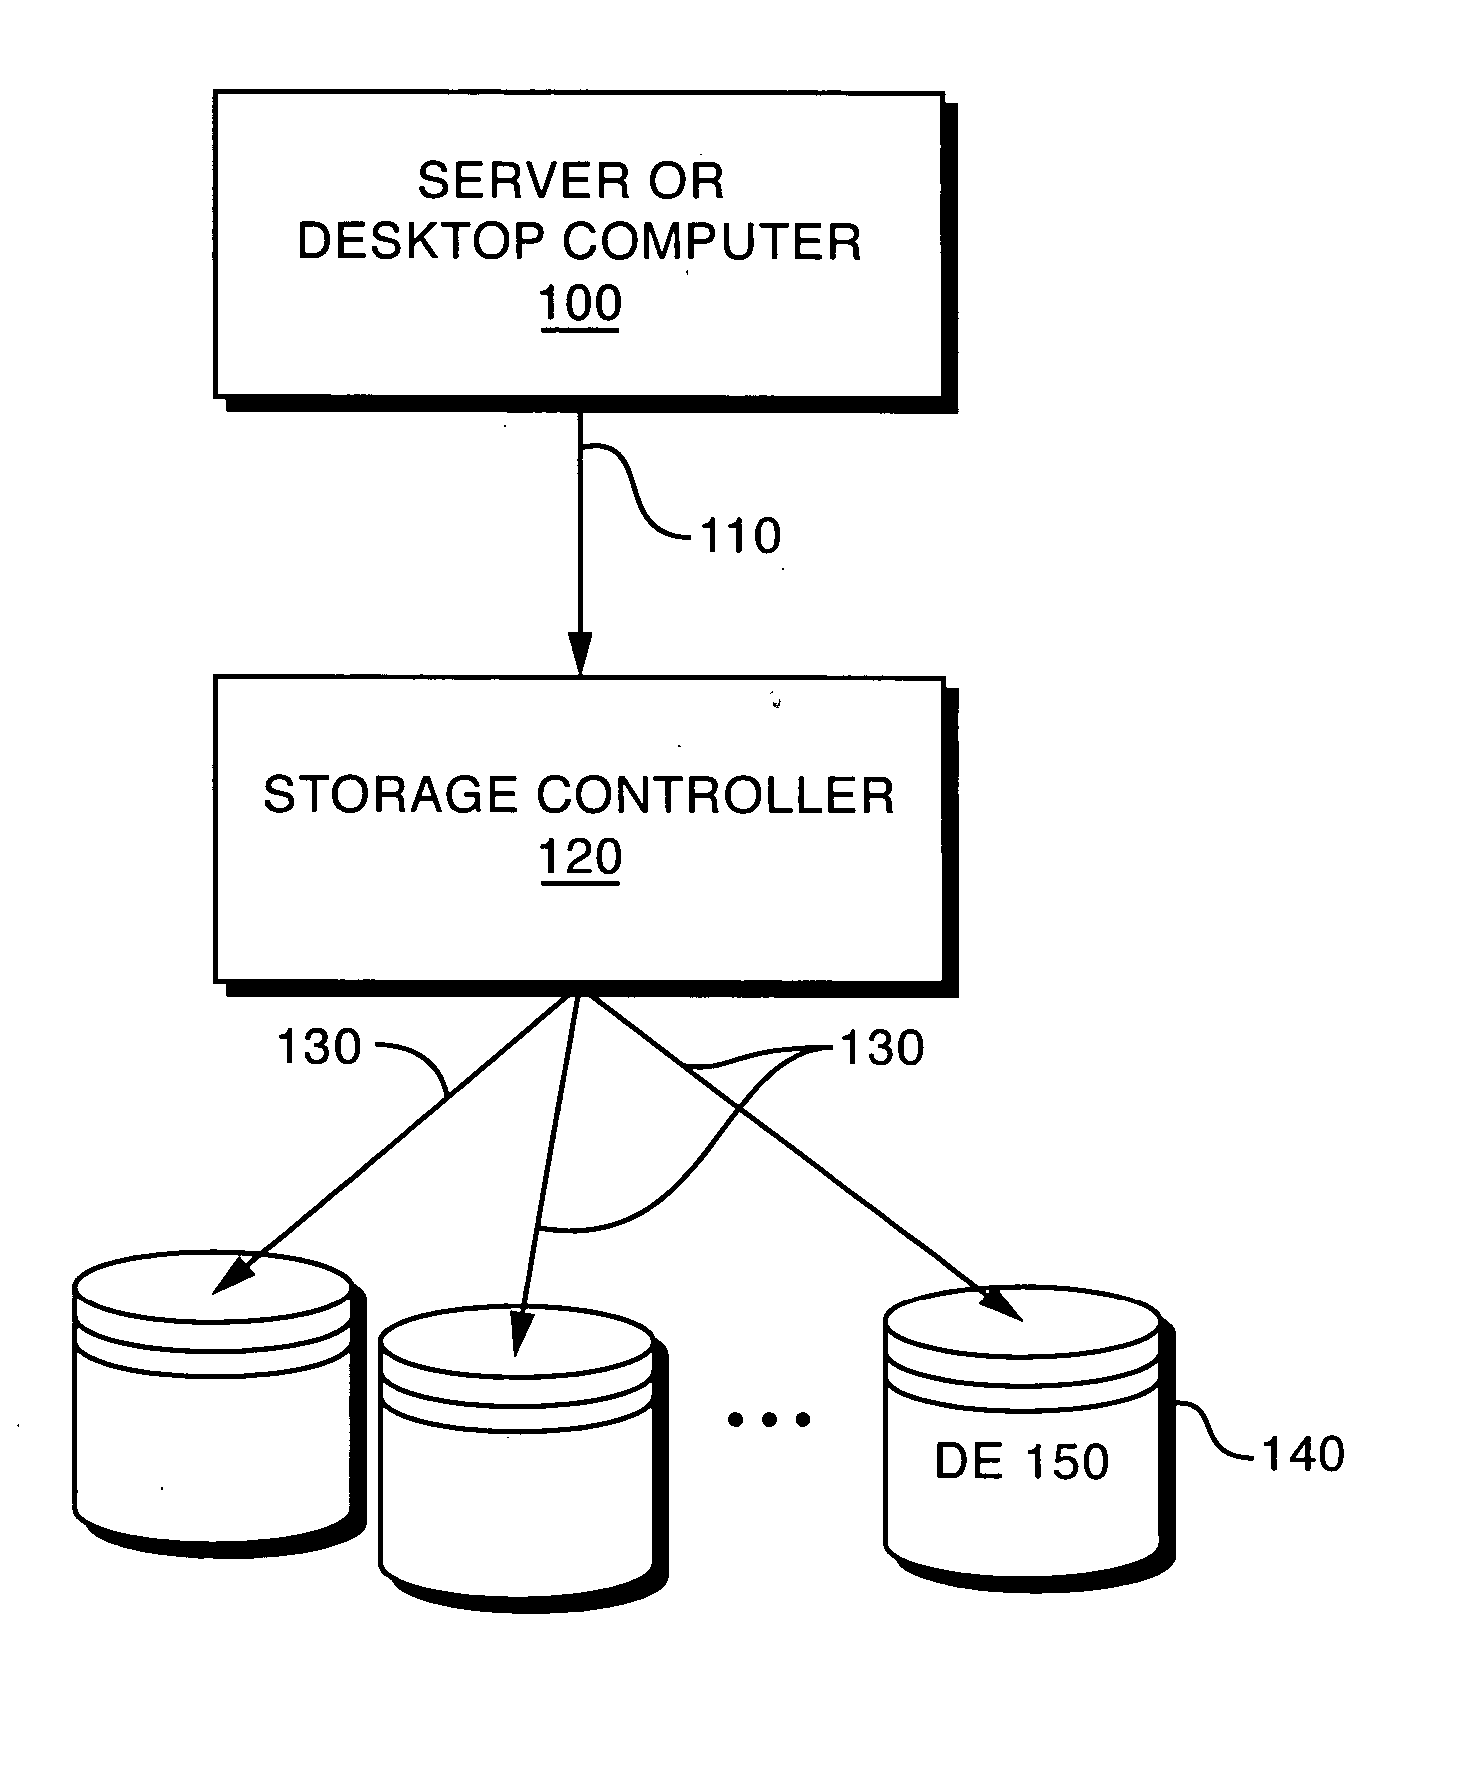 Method for maintaining track data integrity in magnetic disk storage devices